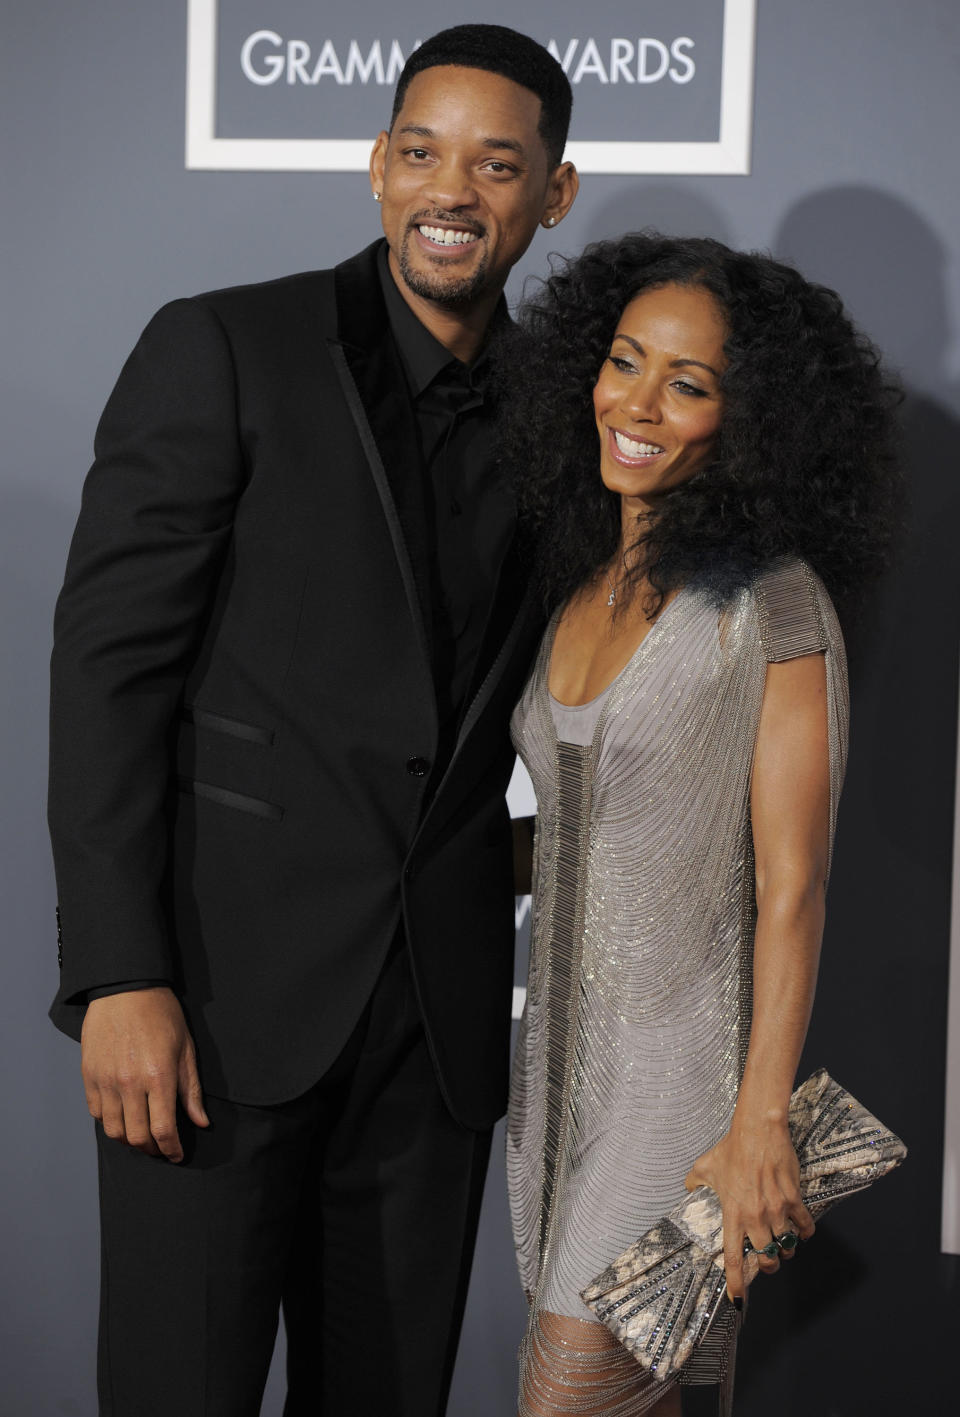 He's gay. She's a lesbian. Both are each other's "beards." They are swingers.  Hollywood power couple Will and Jada Pinkett Smith have long faced an <a href="http://www.ibtimes.com/jada-pinkett-smith-speaks-out-rumors-about-her-marriage-will-smith-will-and-i-know-truth-437168">onslaught of rumors</a> facing their relationship, hearing just about everything in the book. The two have also faced <a href="http://www.huffingtonpost.com/2012/08/10/will-smith-jada-pinkett-s_n_1765341.html">multiple divorce rumors</a> with some saying the <a href="http://gawker.com/5834383/which-gay-celebrity-rumors-do-you-believe">cause was due to their closeted sexual identities</a>. 